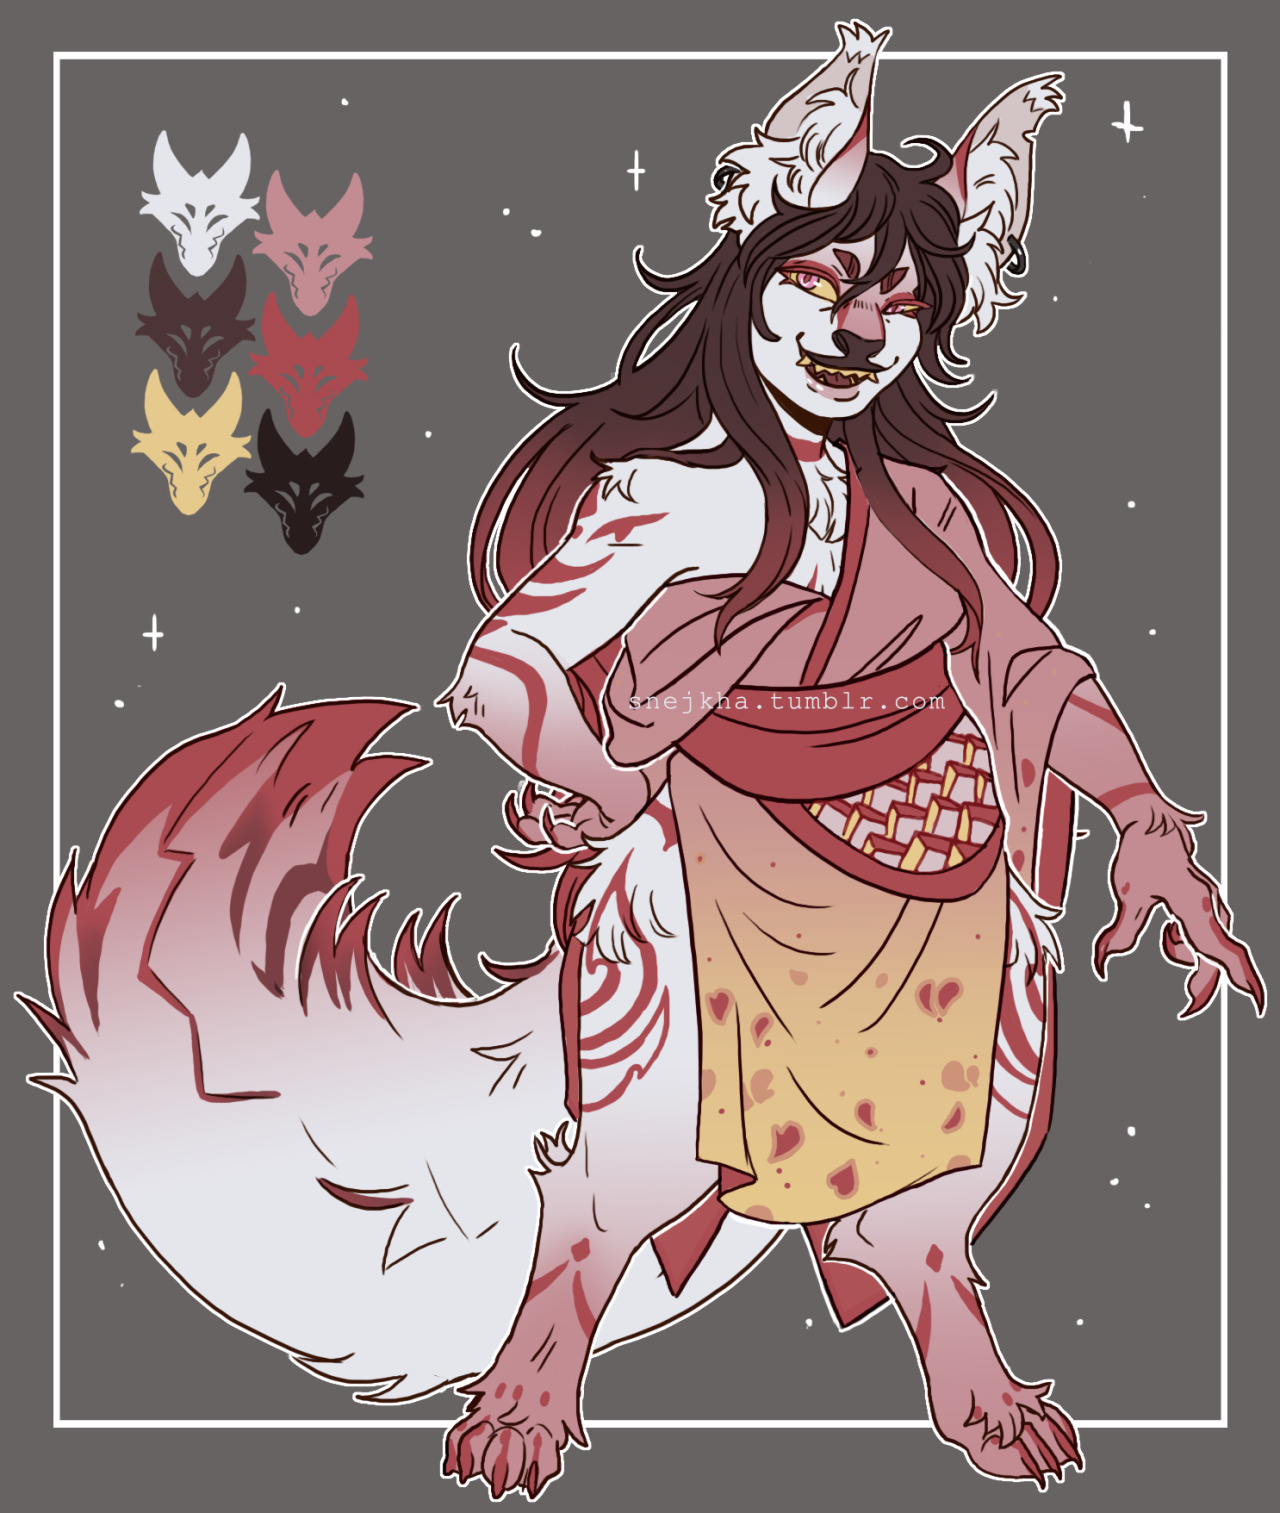 Kitsune that belongs to @monstrous-ideas /// #my dumb art #monstrous-ideas#kitsune #im returning to my past of just using a round brush for everything and its very fun